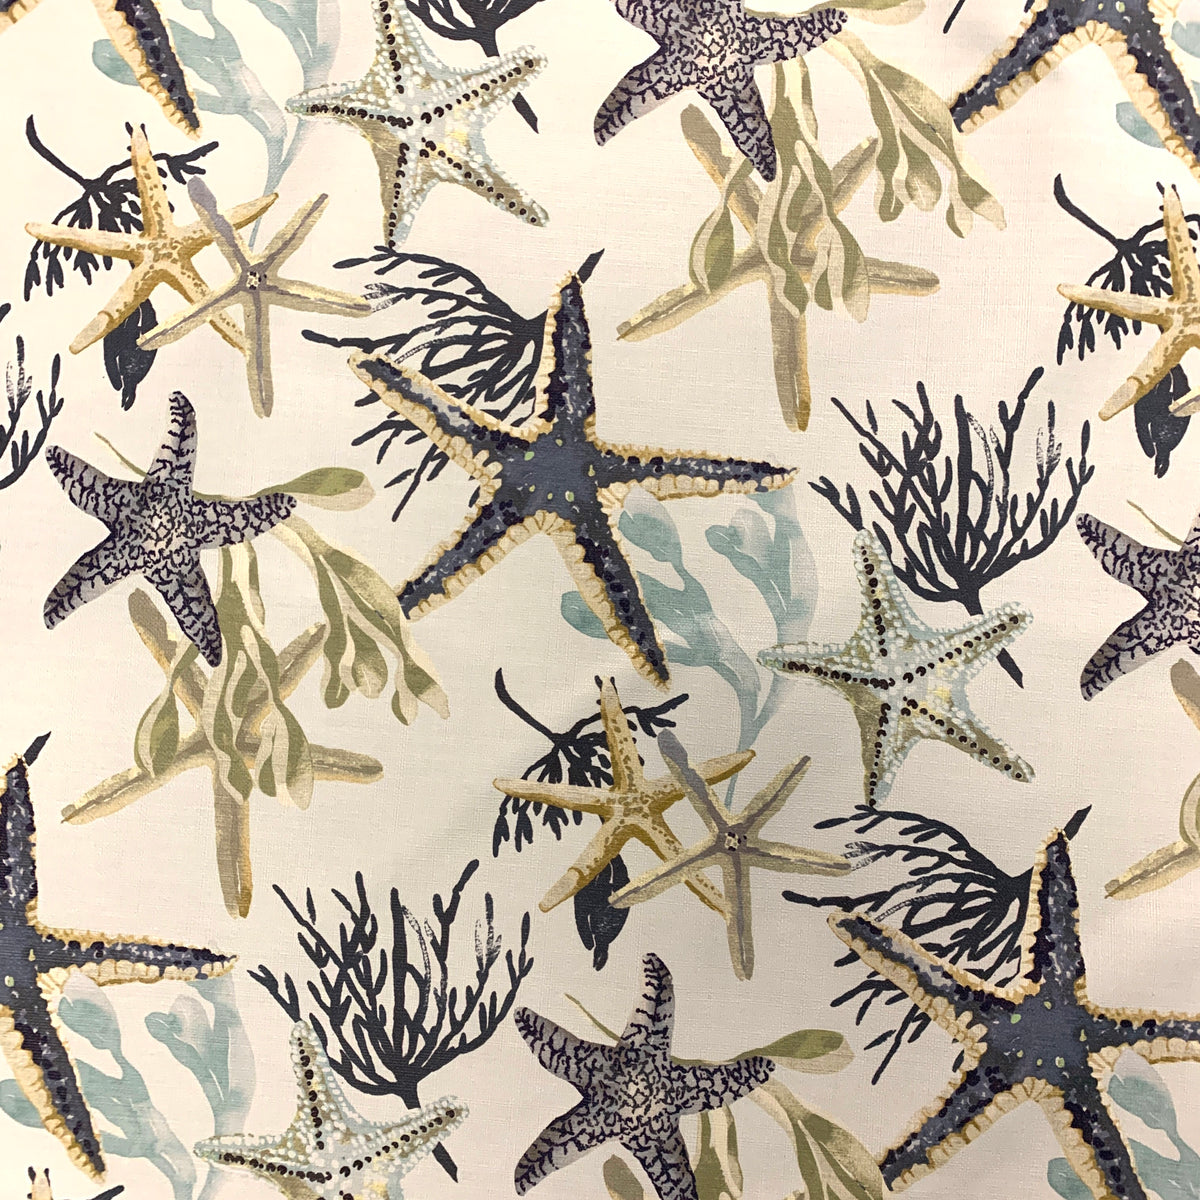 jejeloiu Beach Shell Upholstery Fabric by The Yard, Ocean Nautical Starfish  Reupholstery Fabric for Chairs, Marine Sealife Blue Sea Decorative